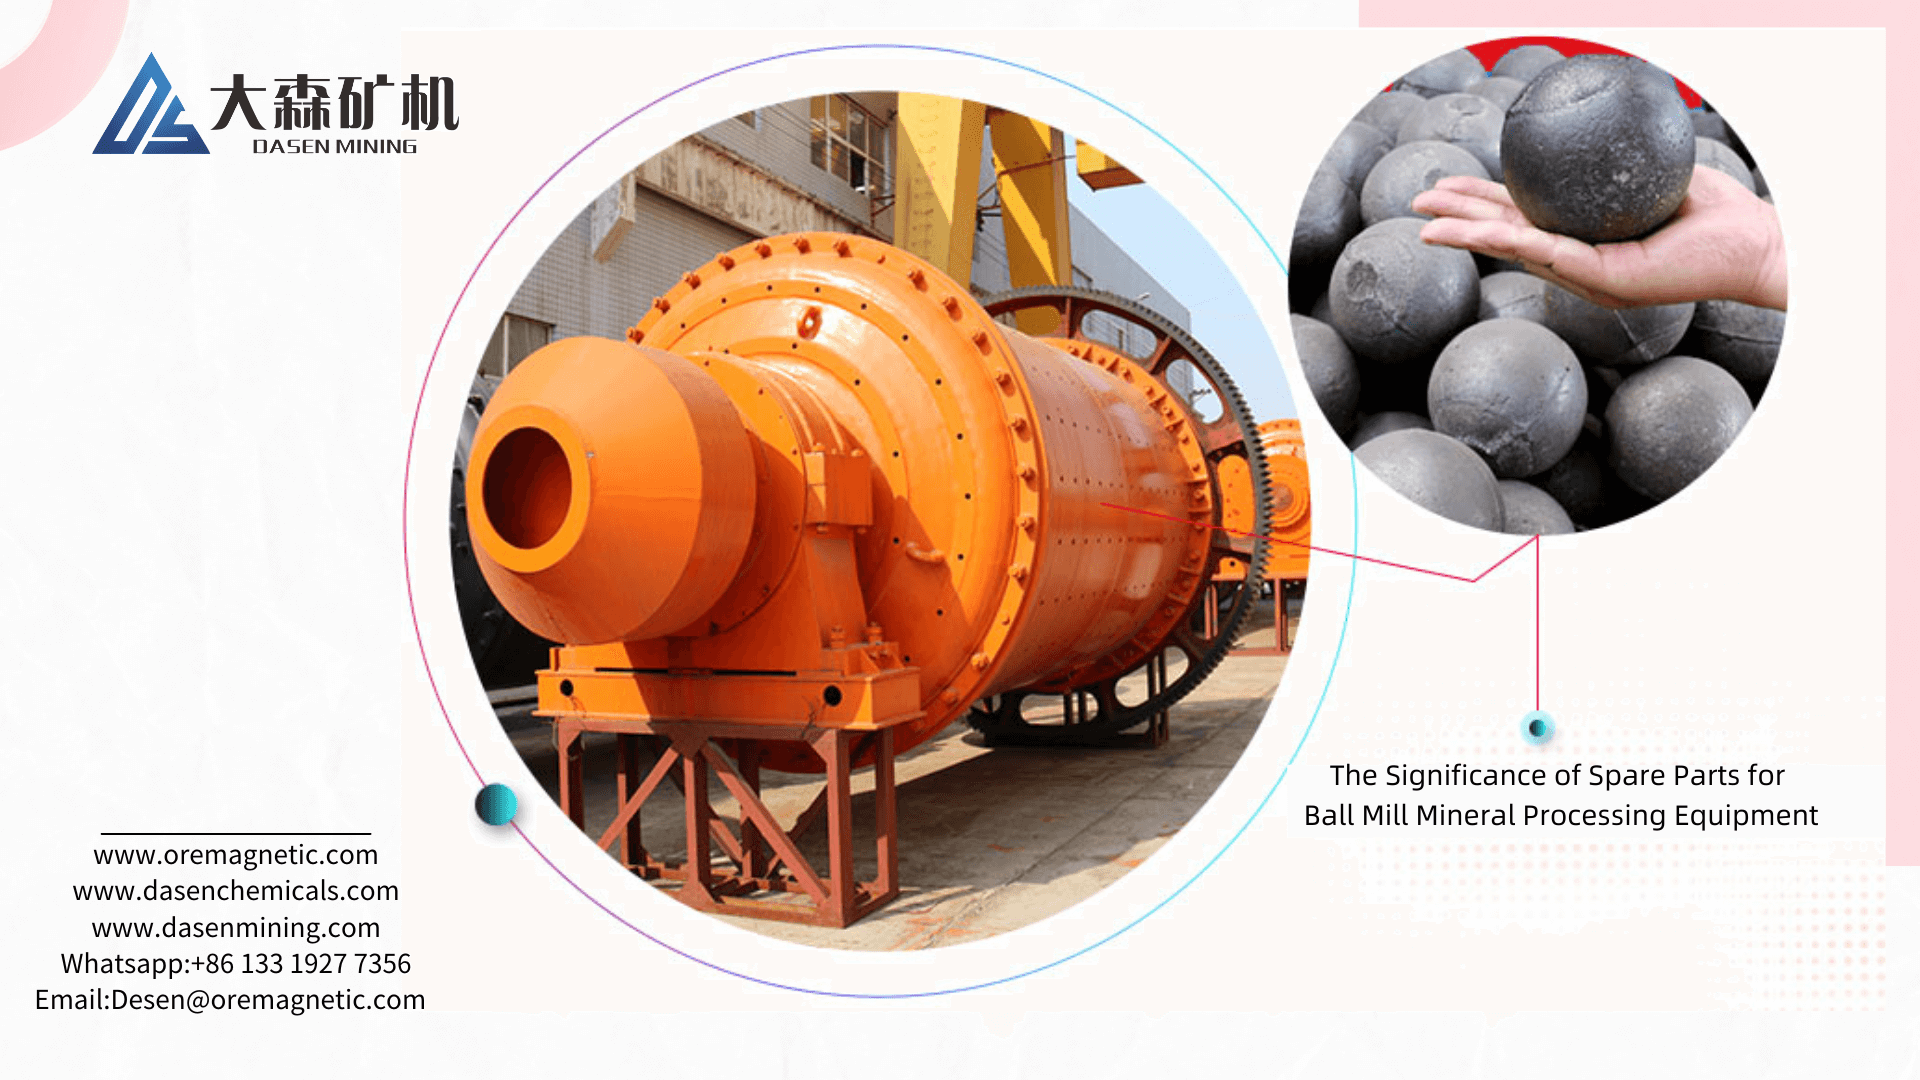 ball mill - The Significance of Spare Parts for Ball Mill Mineral Processing Equipment